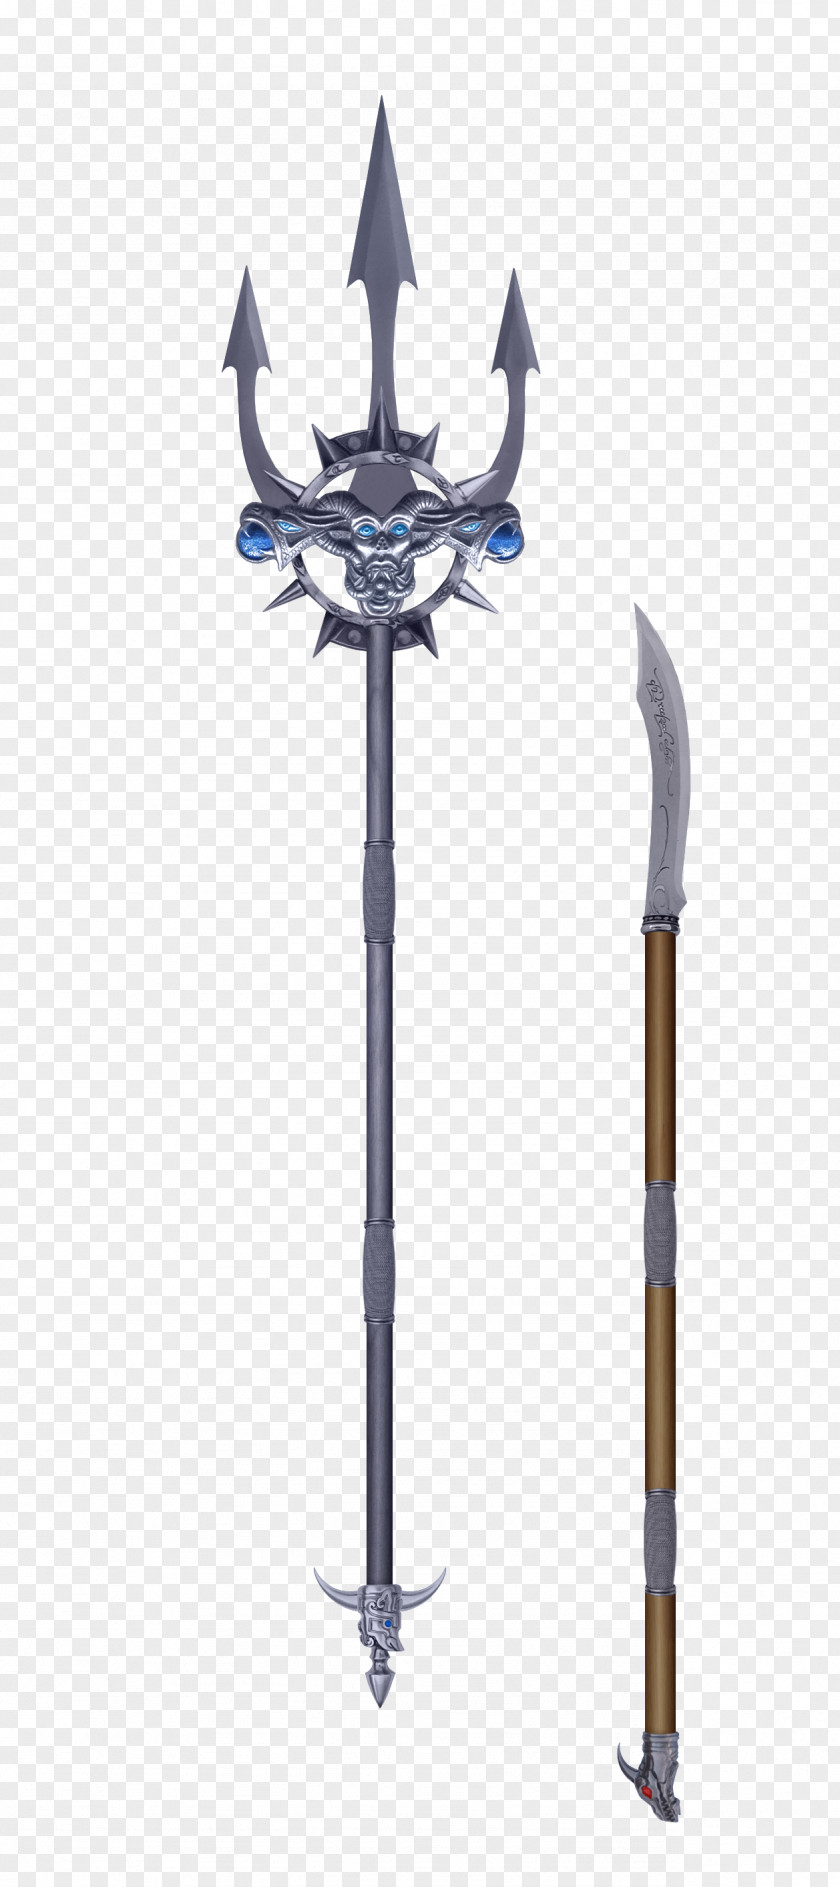 Silver Weapons Sword Knife Weapon Trident PNG